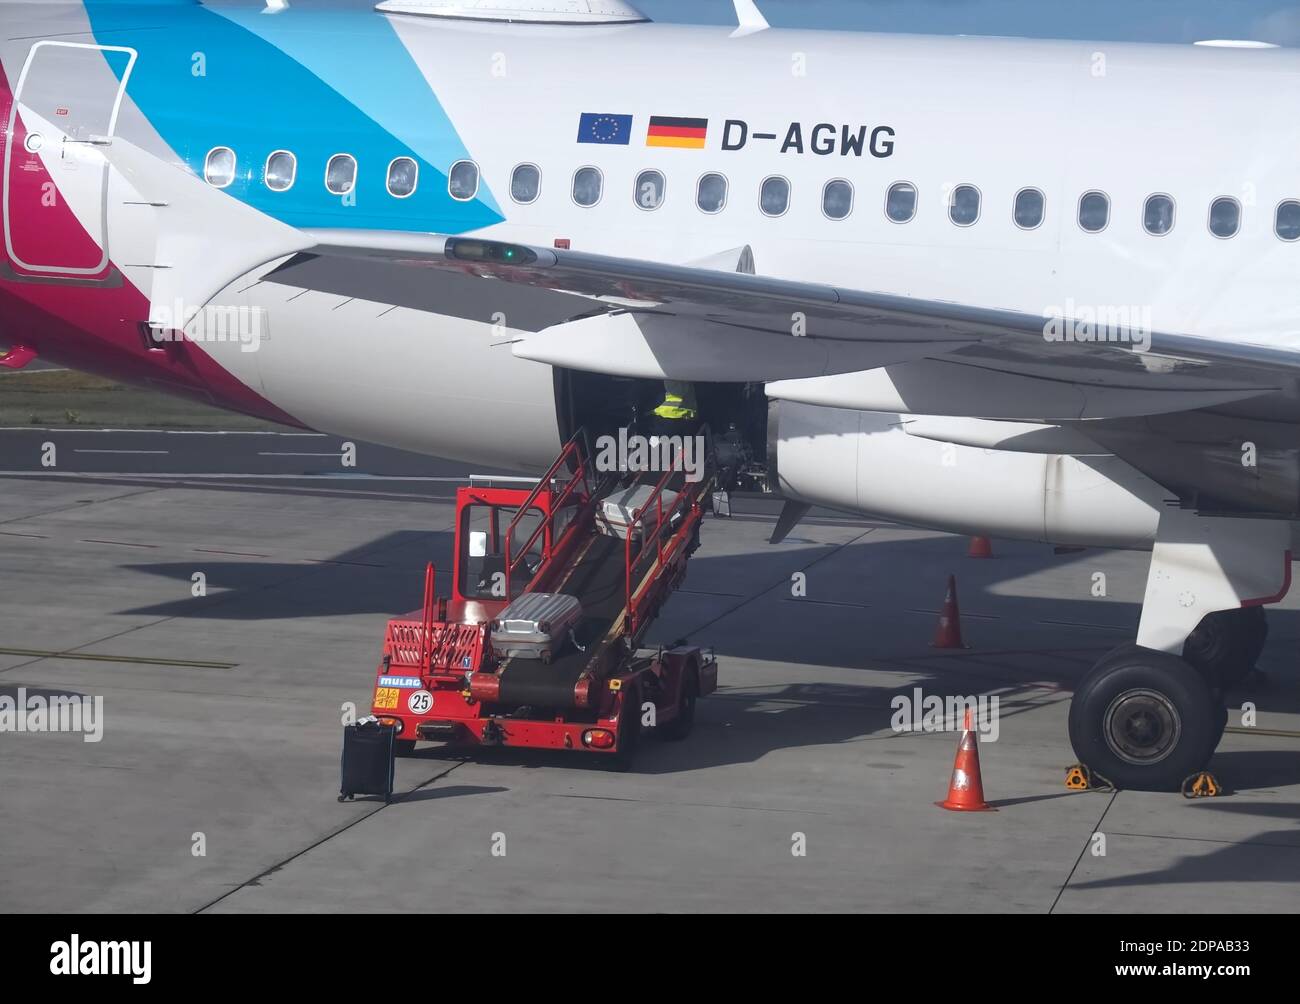 Eurowings airplane at Faro airport in park position is loaded with luggage Stock Photo